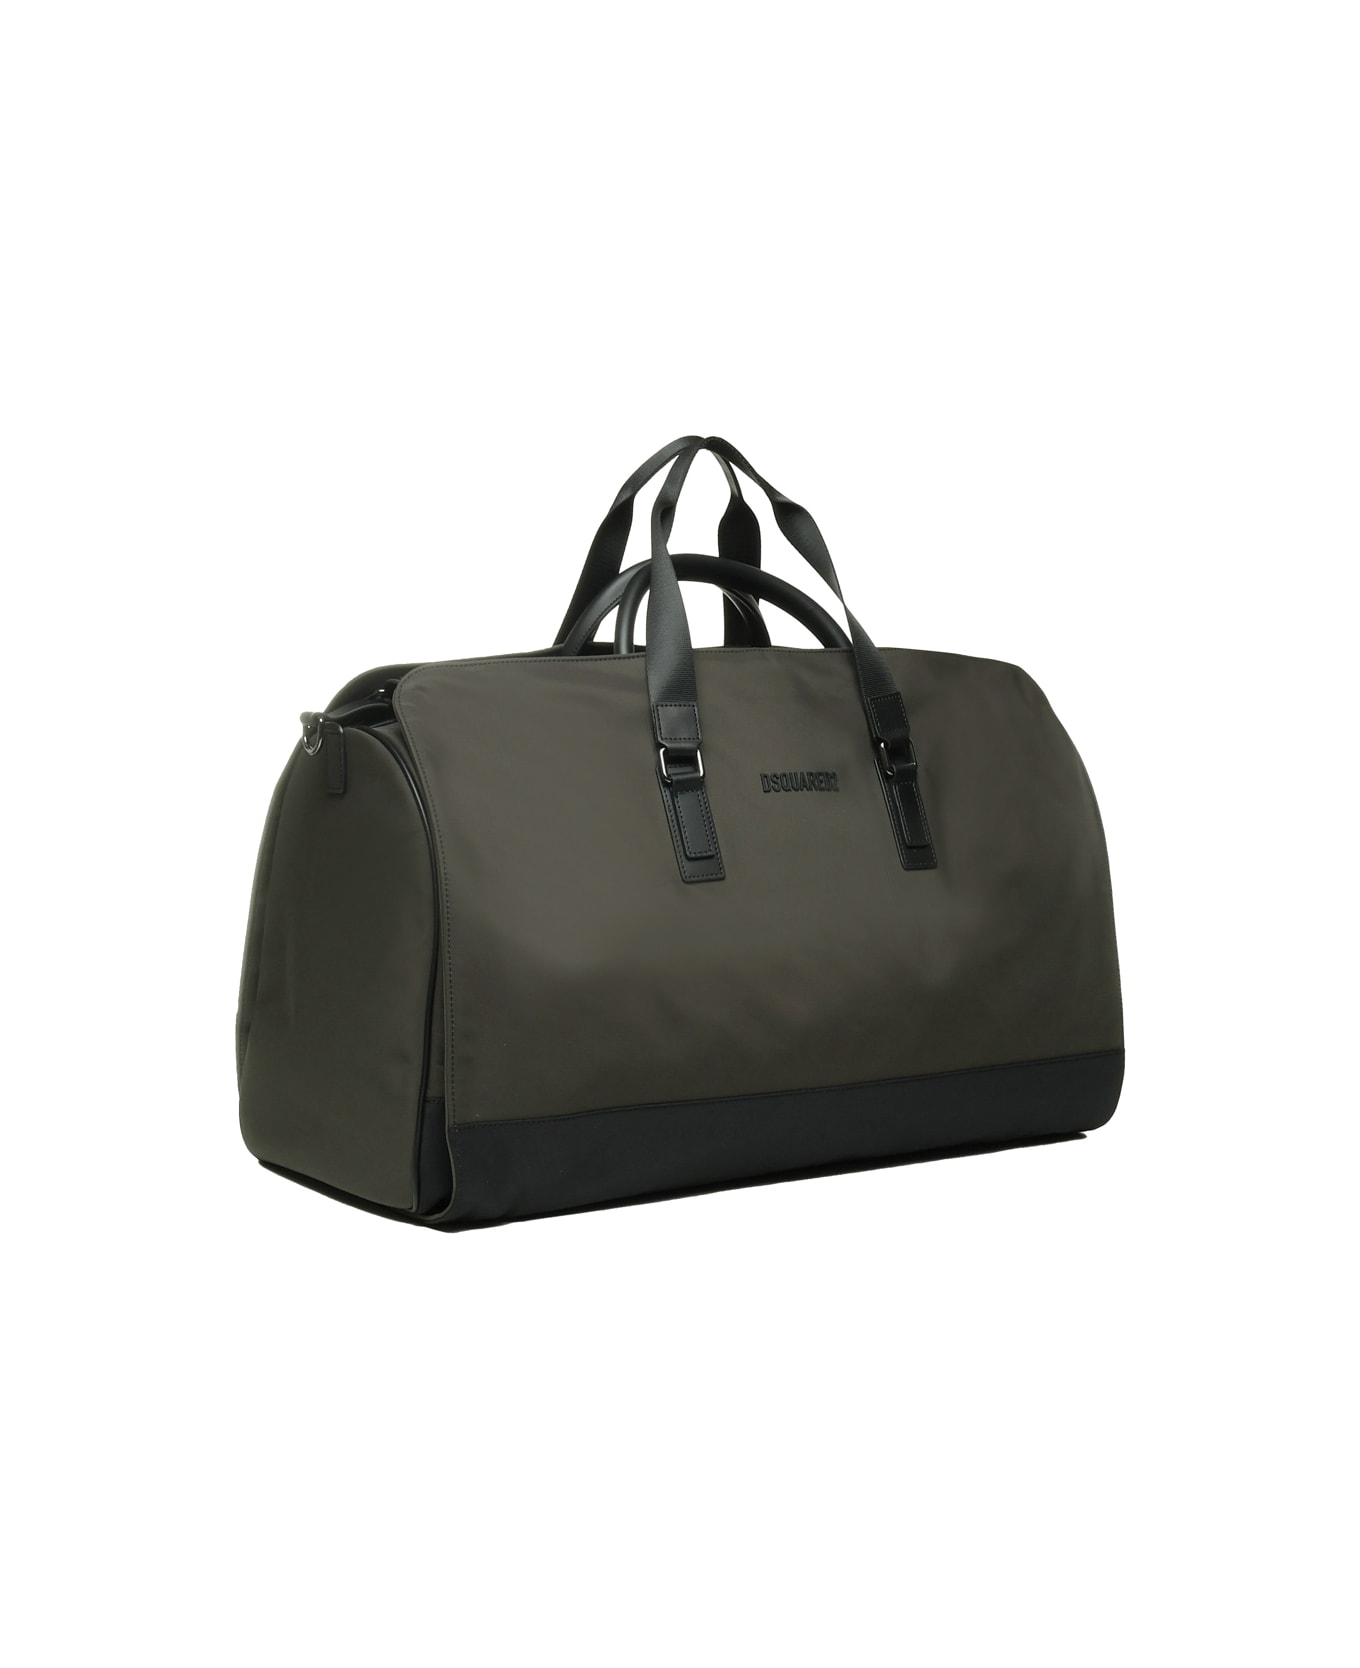 Dsquared2 Urban 2 In 1 Bag Dsquared2 - Grey トラベルバッグ